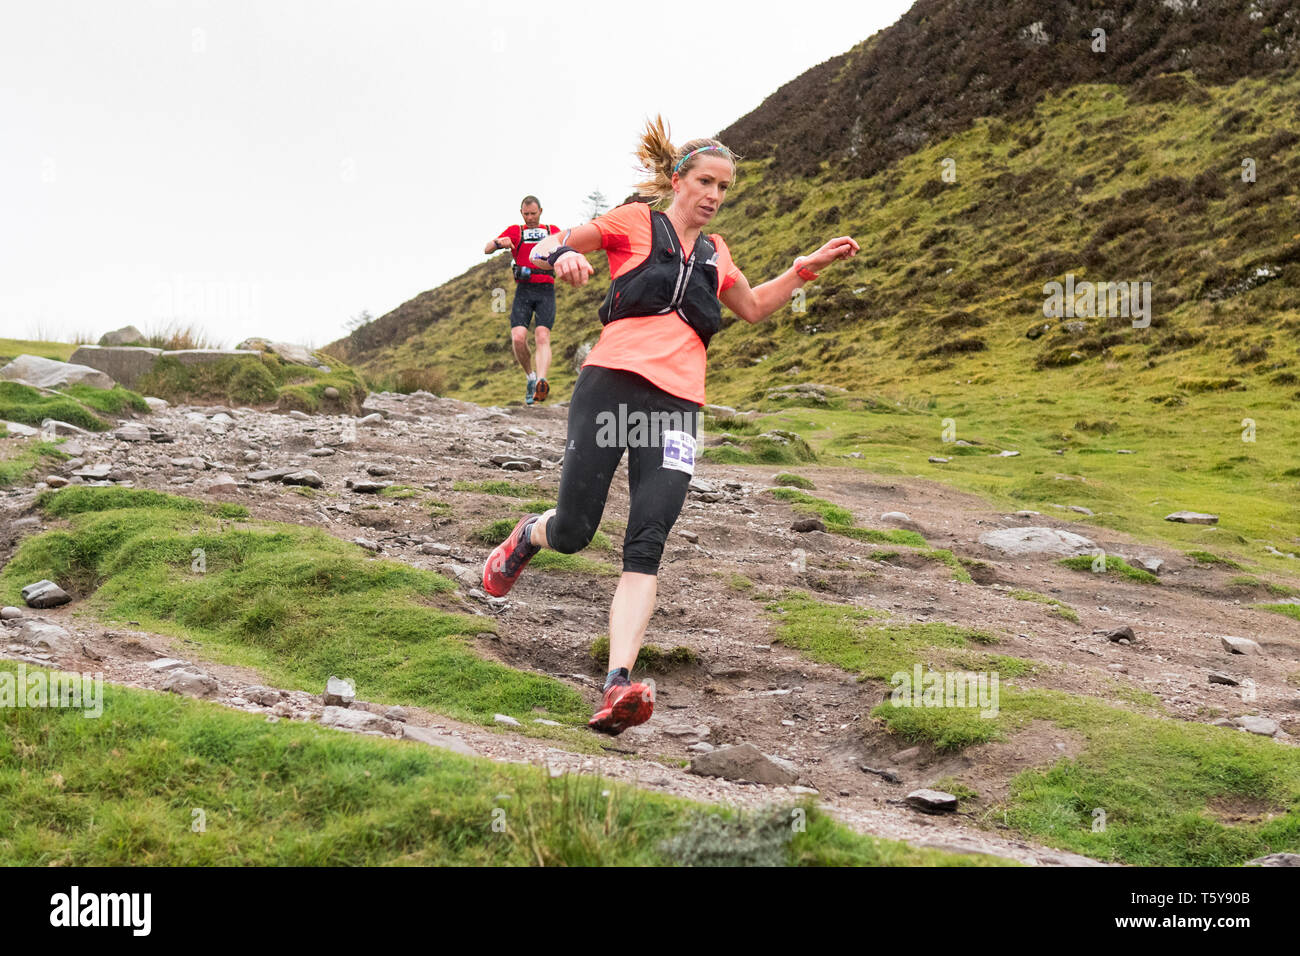 Conic Hill, Loch Lomond, Scotland, UK - 27 April 2019: uk weather - very heavy showers partially obscure the views over Loch Lomond for ultra marathon runners decending Conic Hill in the early stages of the 53 mile Highland Fling Race.   The arduous ultra marathon trail race follows the path of the West Highland Way through Loch Lomond and the Trossachs National Park between Milngavie and Tyndrum.  Pictured is Beth Pascall, the female winner Credit: Kay Roxby/Alamy Live News Stock Photo